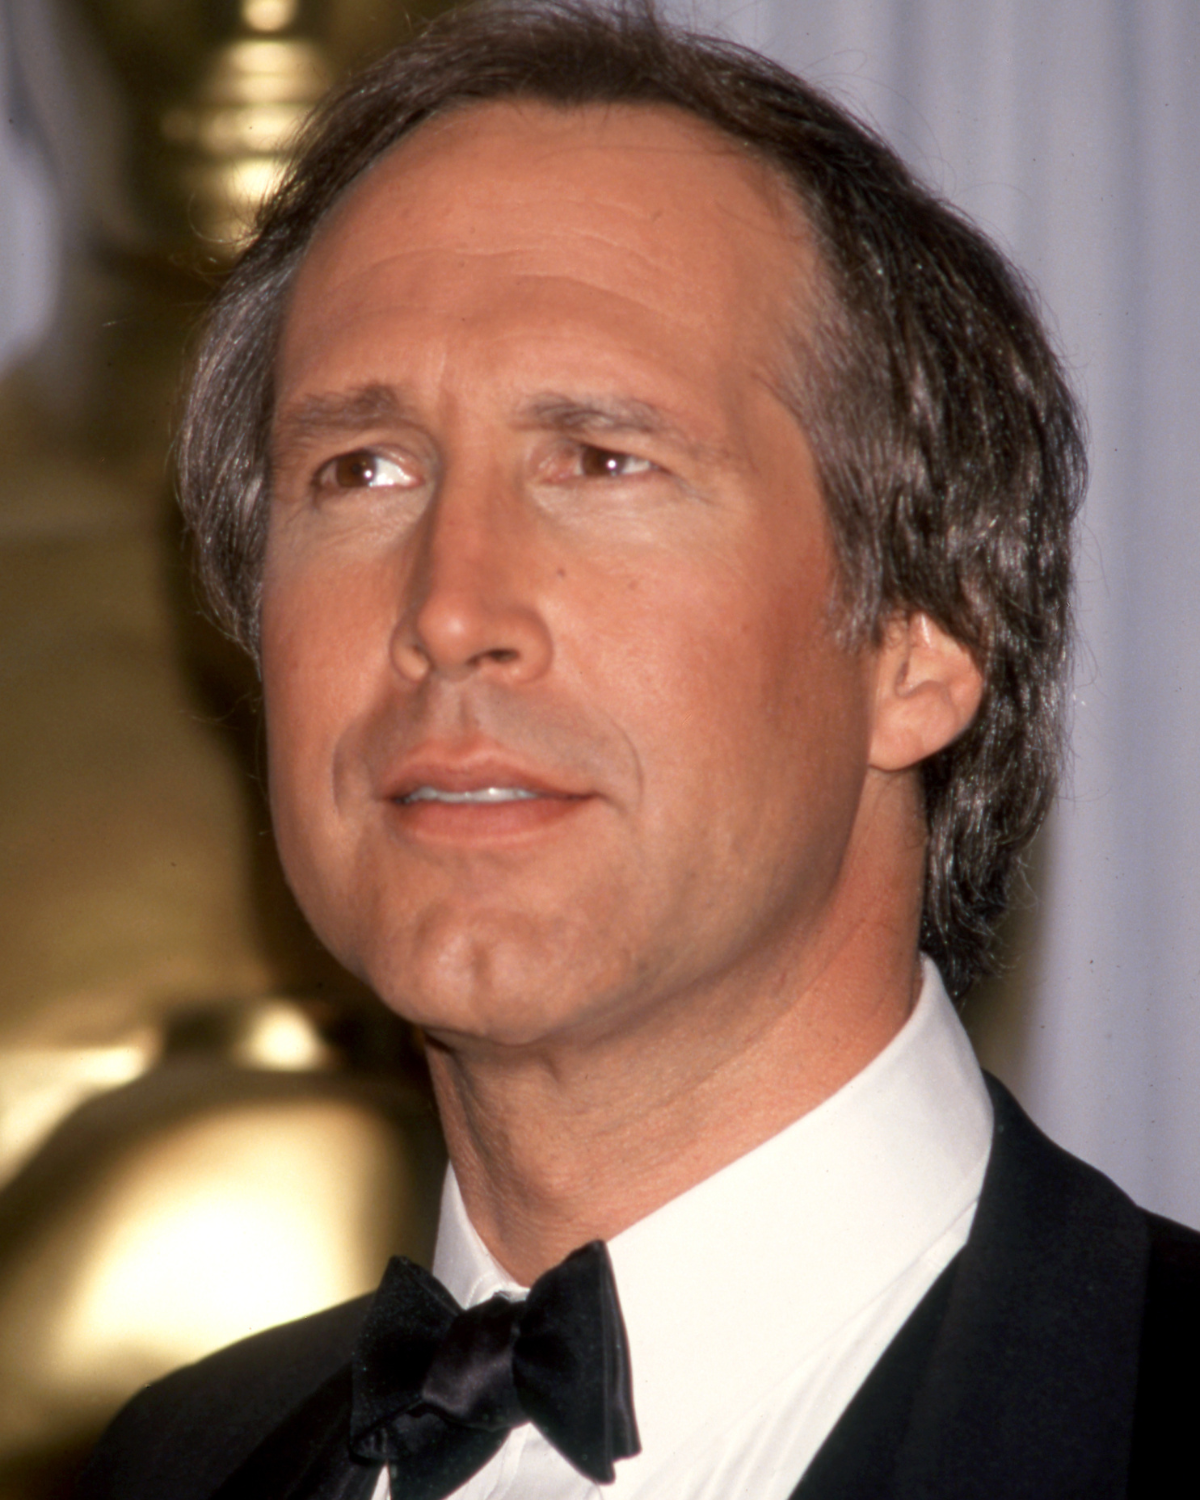 Chevy Chase at the 63rd Academy Awards